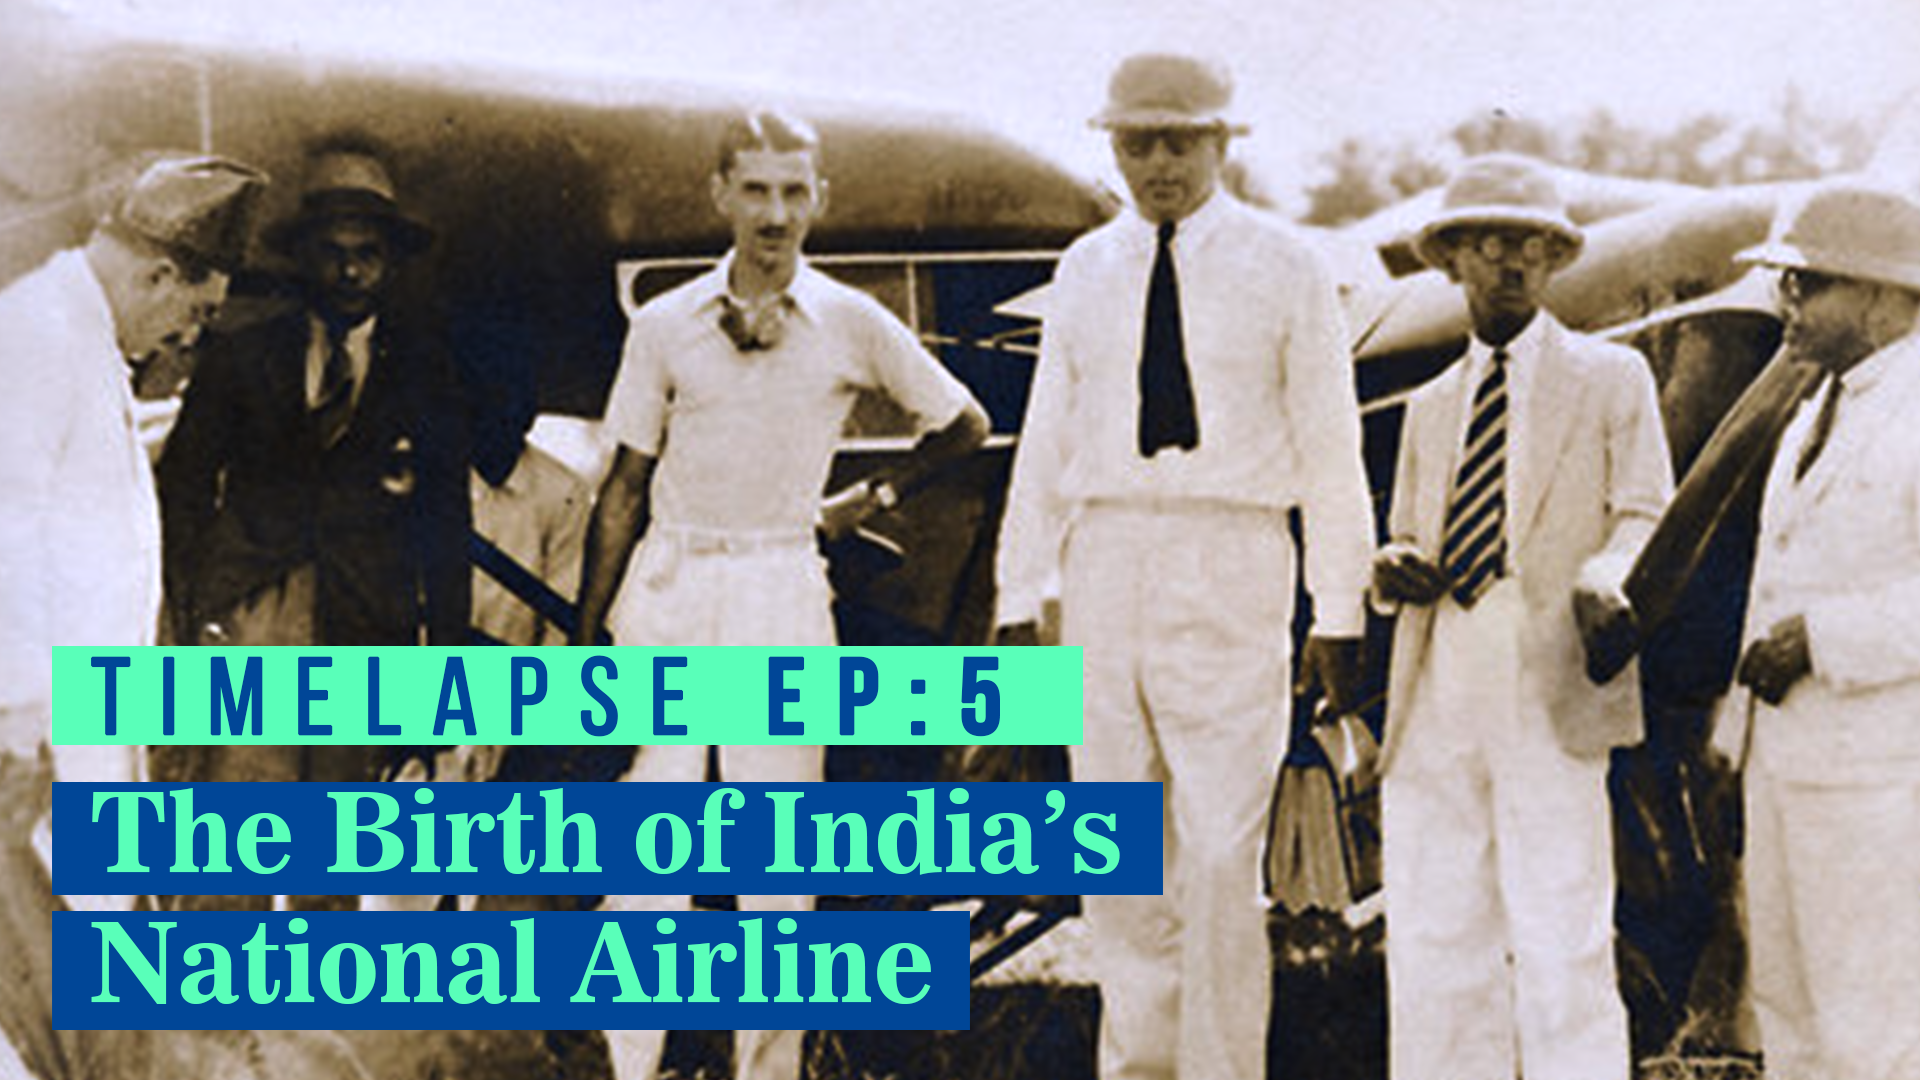 Video: TimeLapse-A photo that captured the Birth of India’s National Airline